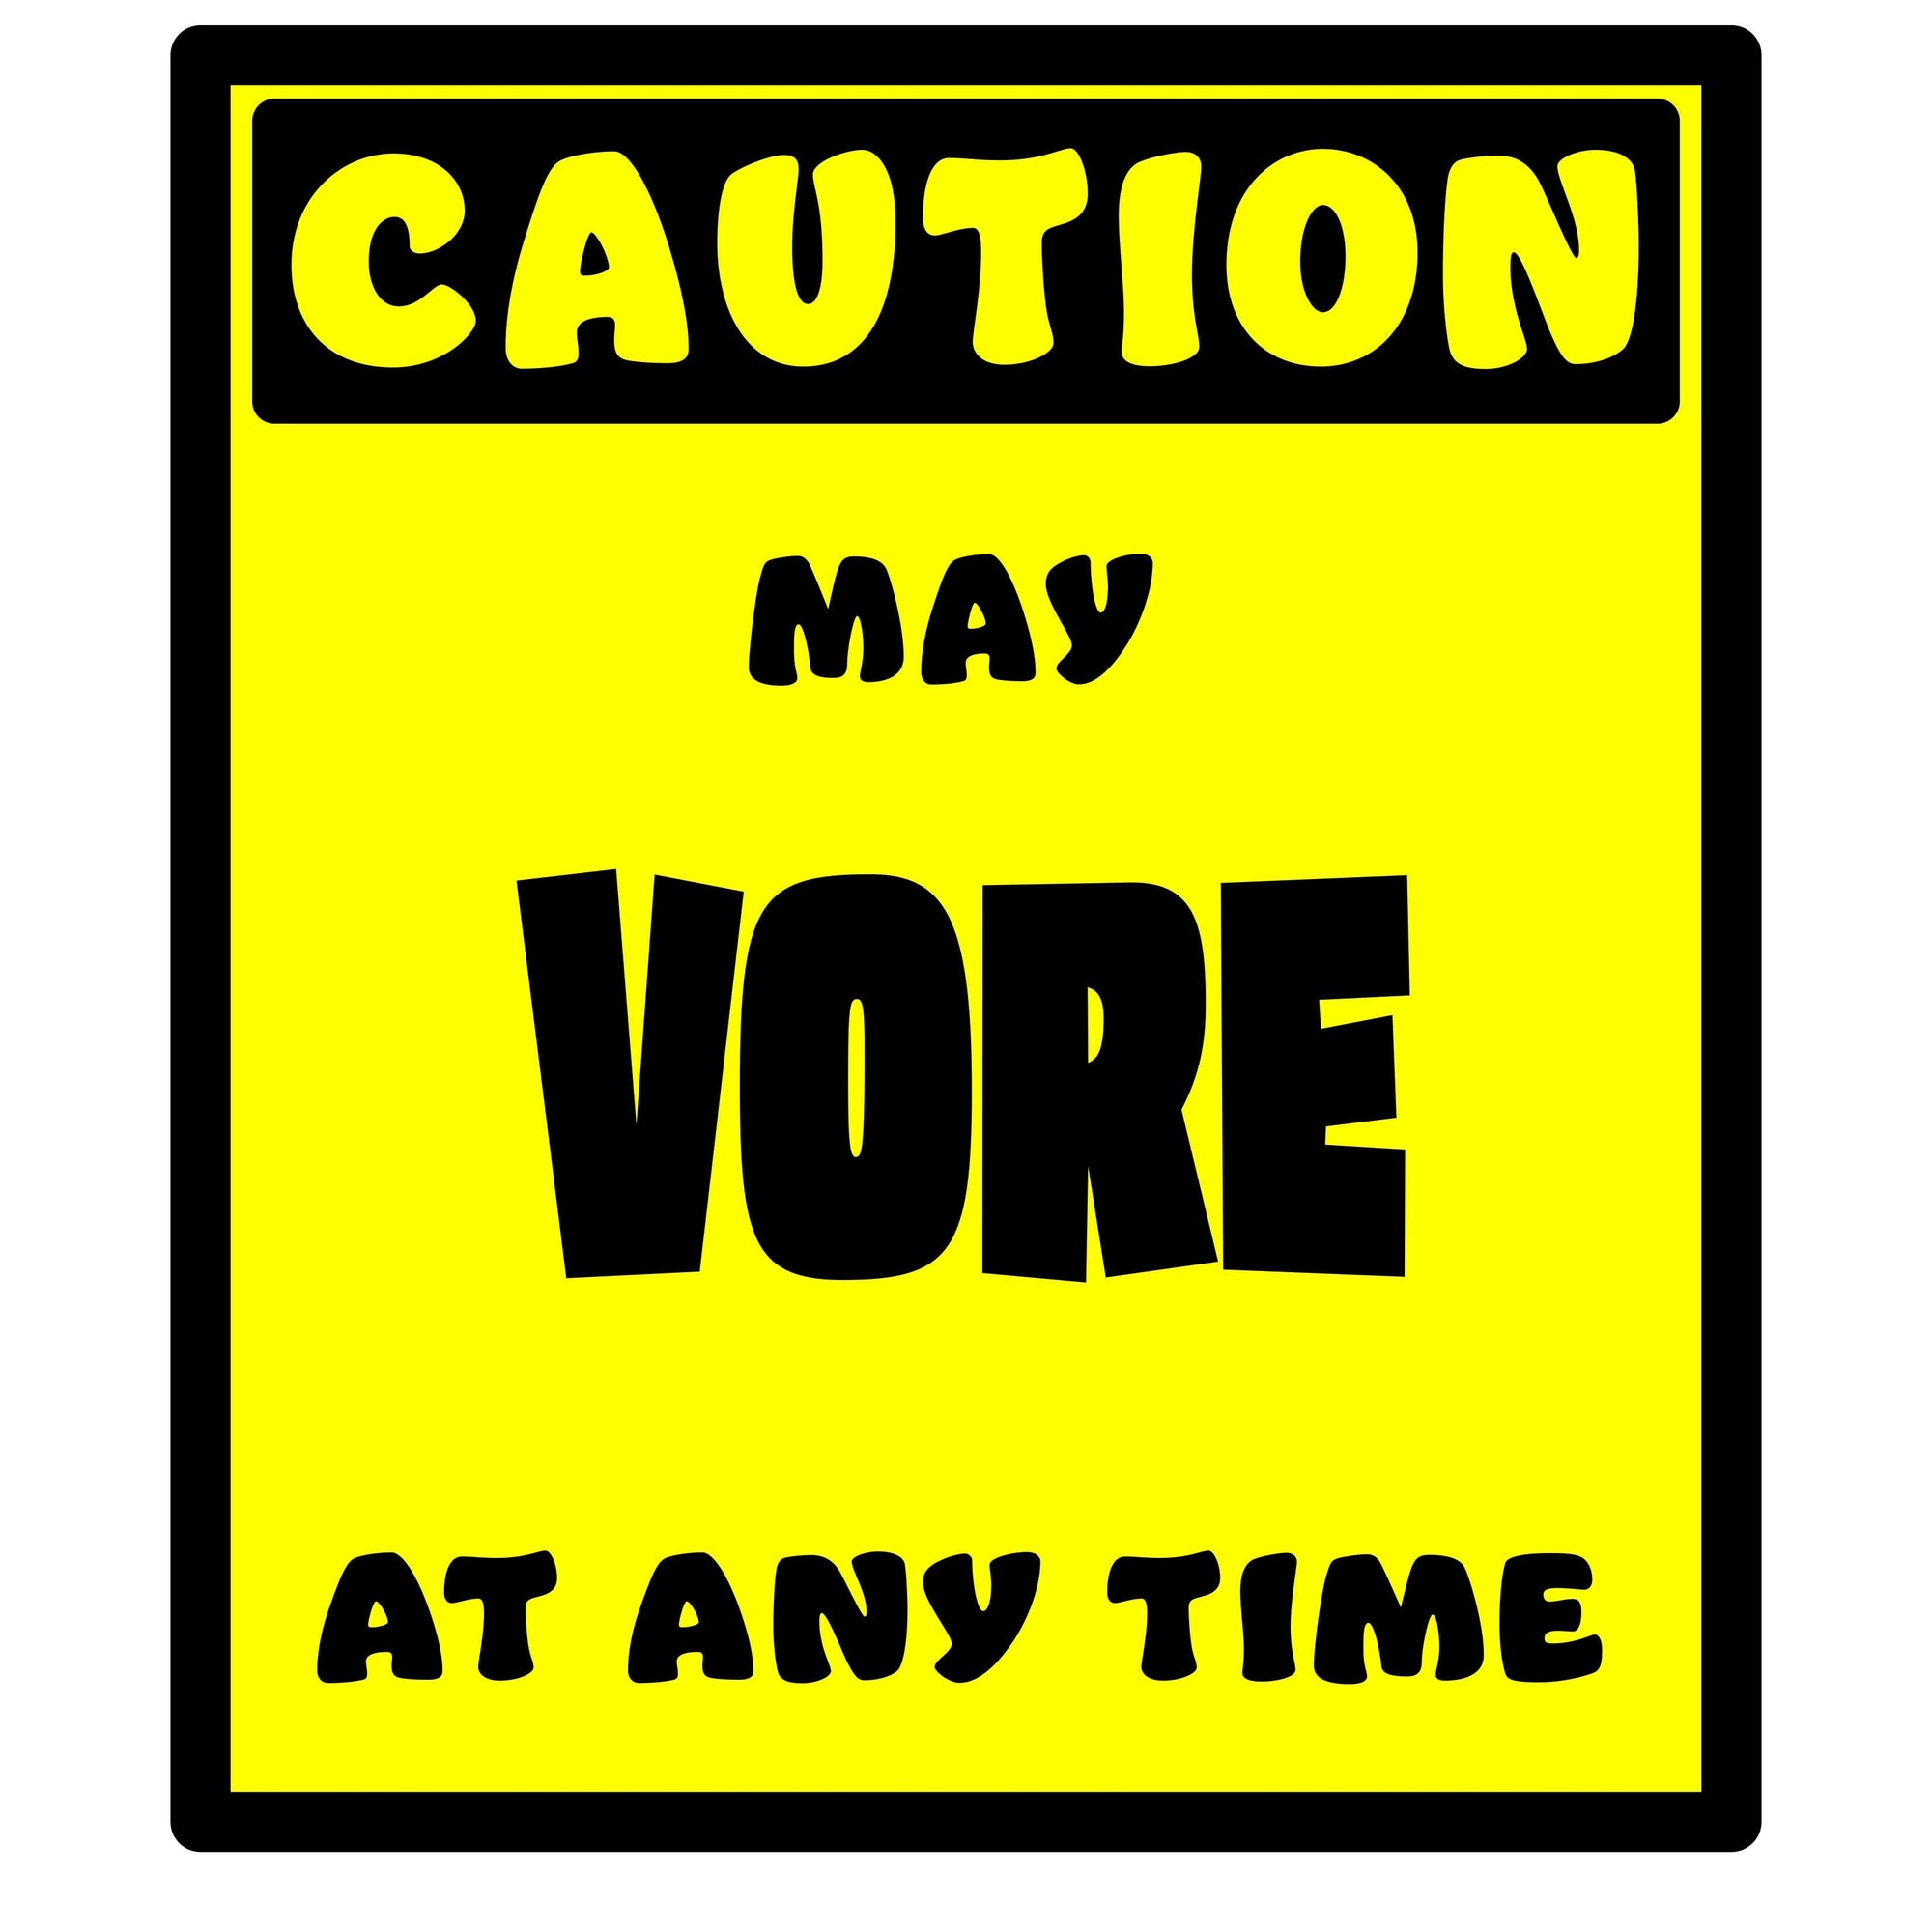 Whootorca - Caution! Series - CAUTION! May VORE at any time!